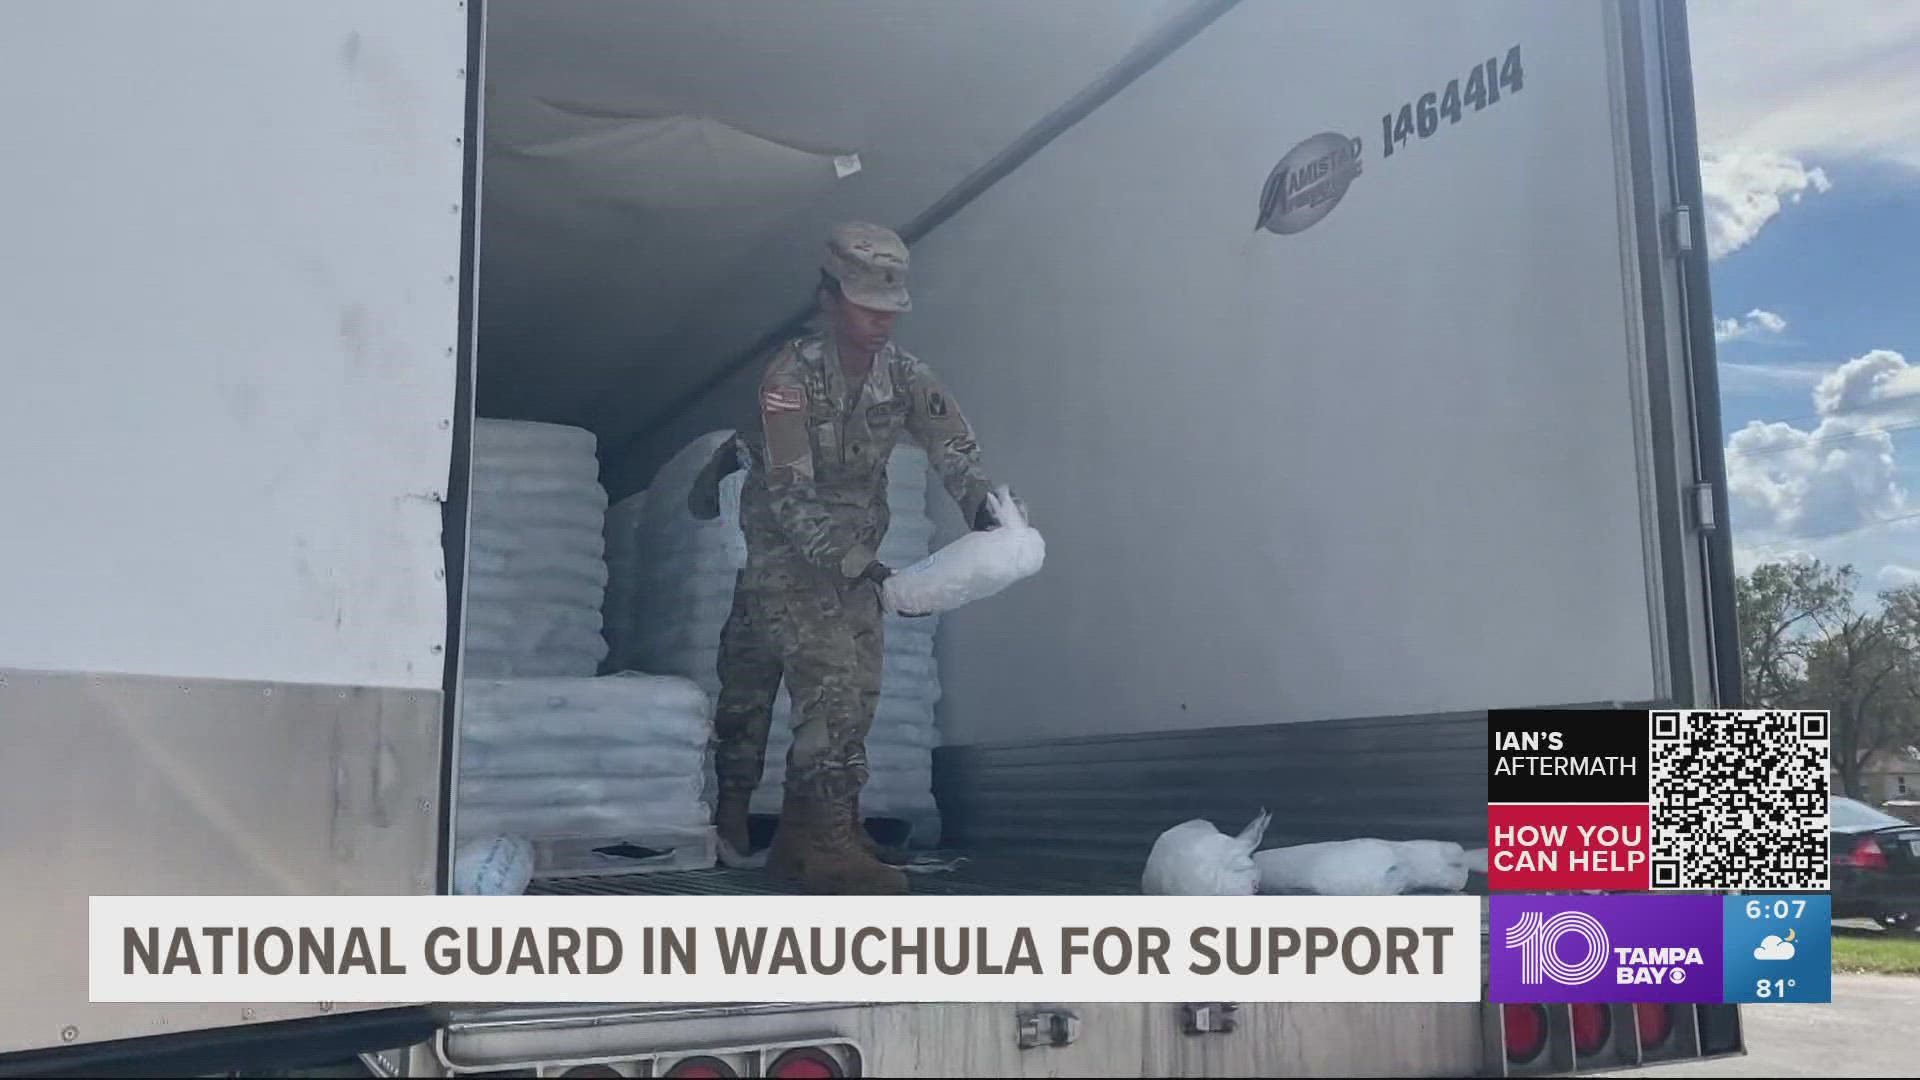 National Guardsmen are giving people essential items they need to start their recovery process.